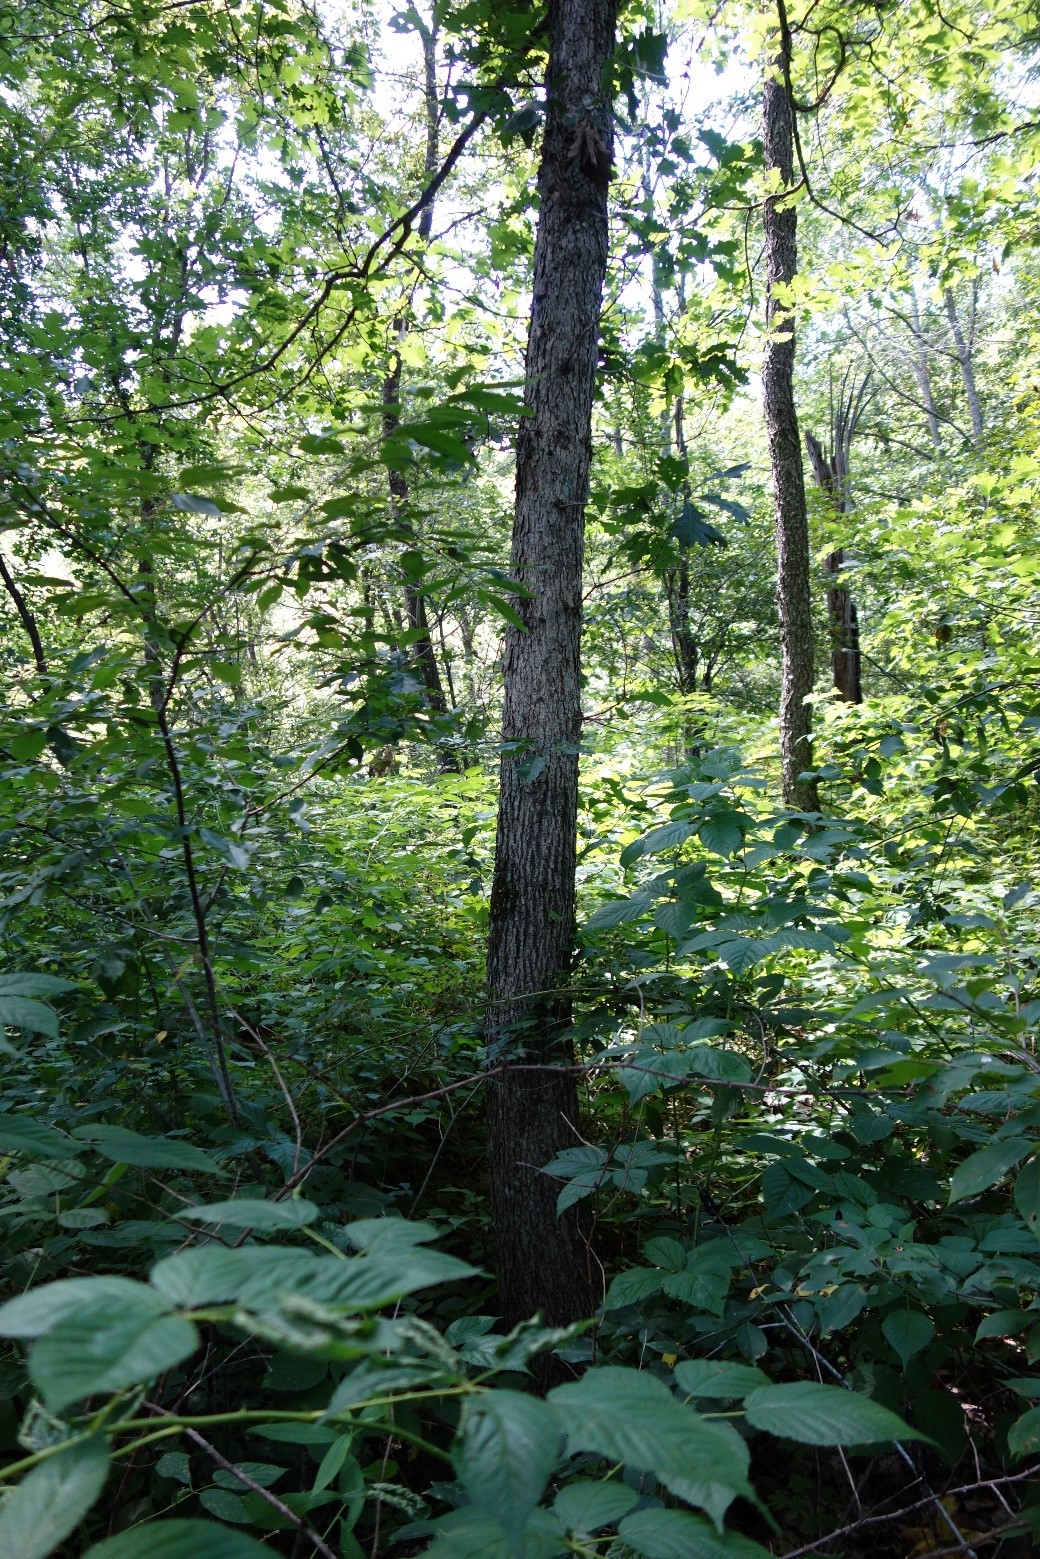 A typical portion of the stand in 2020. Note that full crown closure has not yet been achieved on much of the site, as shown by the amount sunlight hitting the understory and presence of sun-loving raspberry.